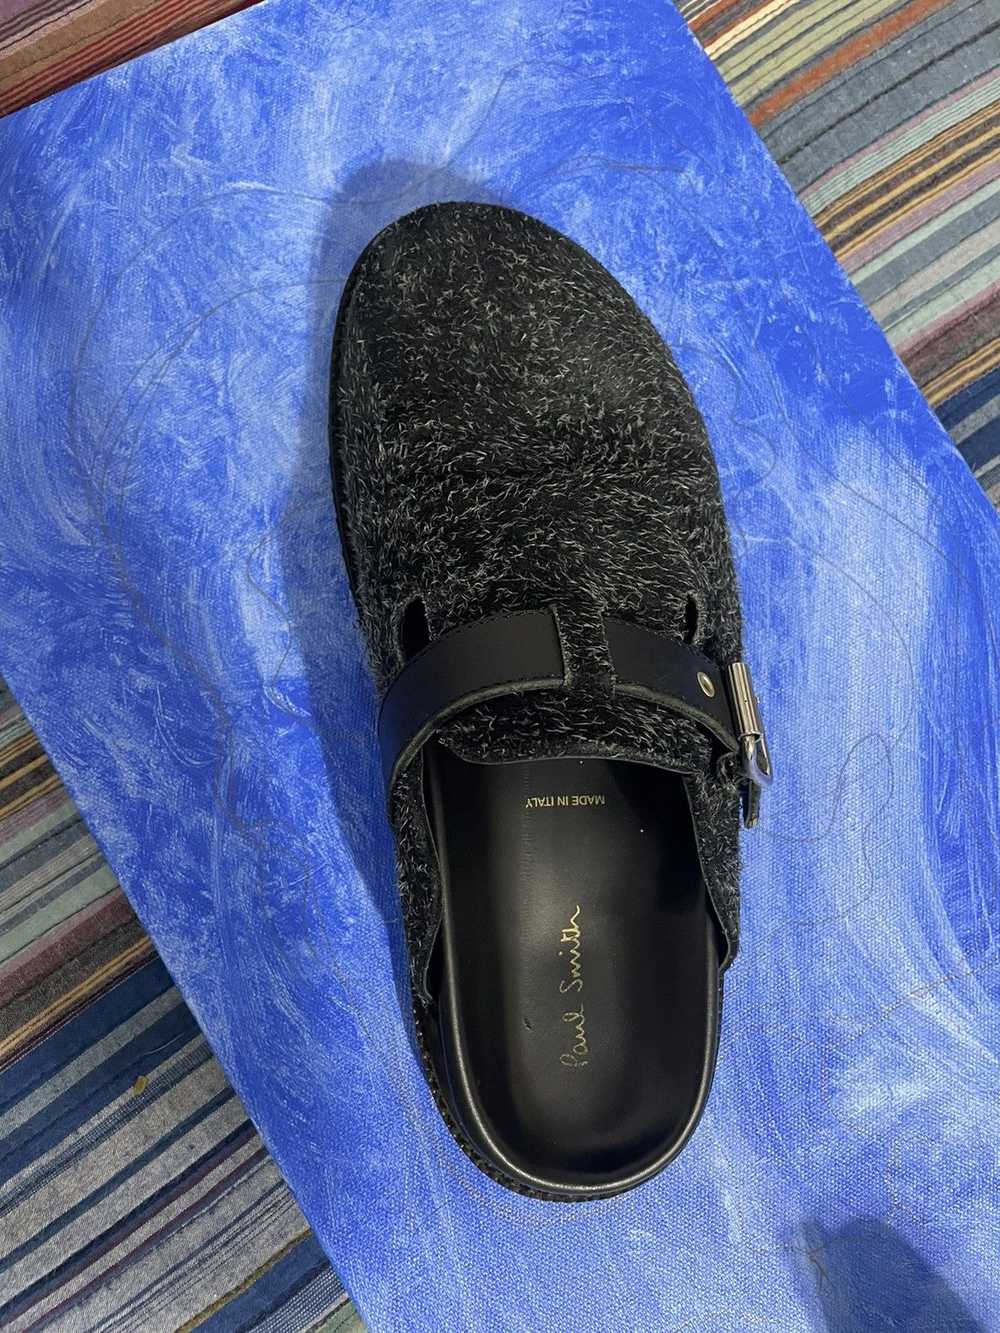 Paul Smith Paul smith black mesa loafer - image 6